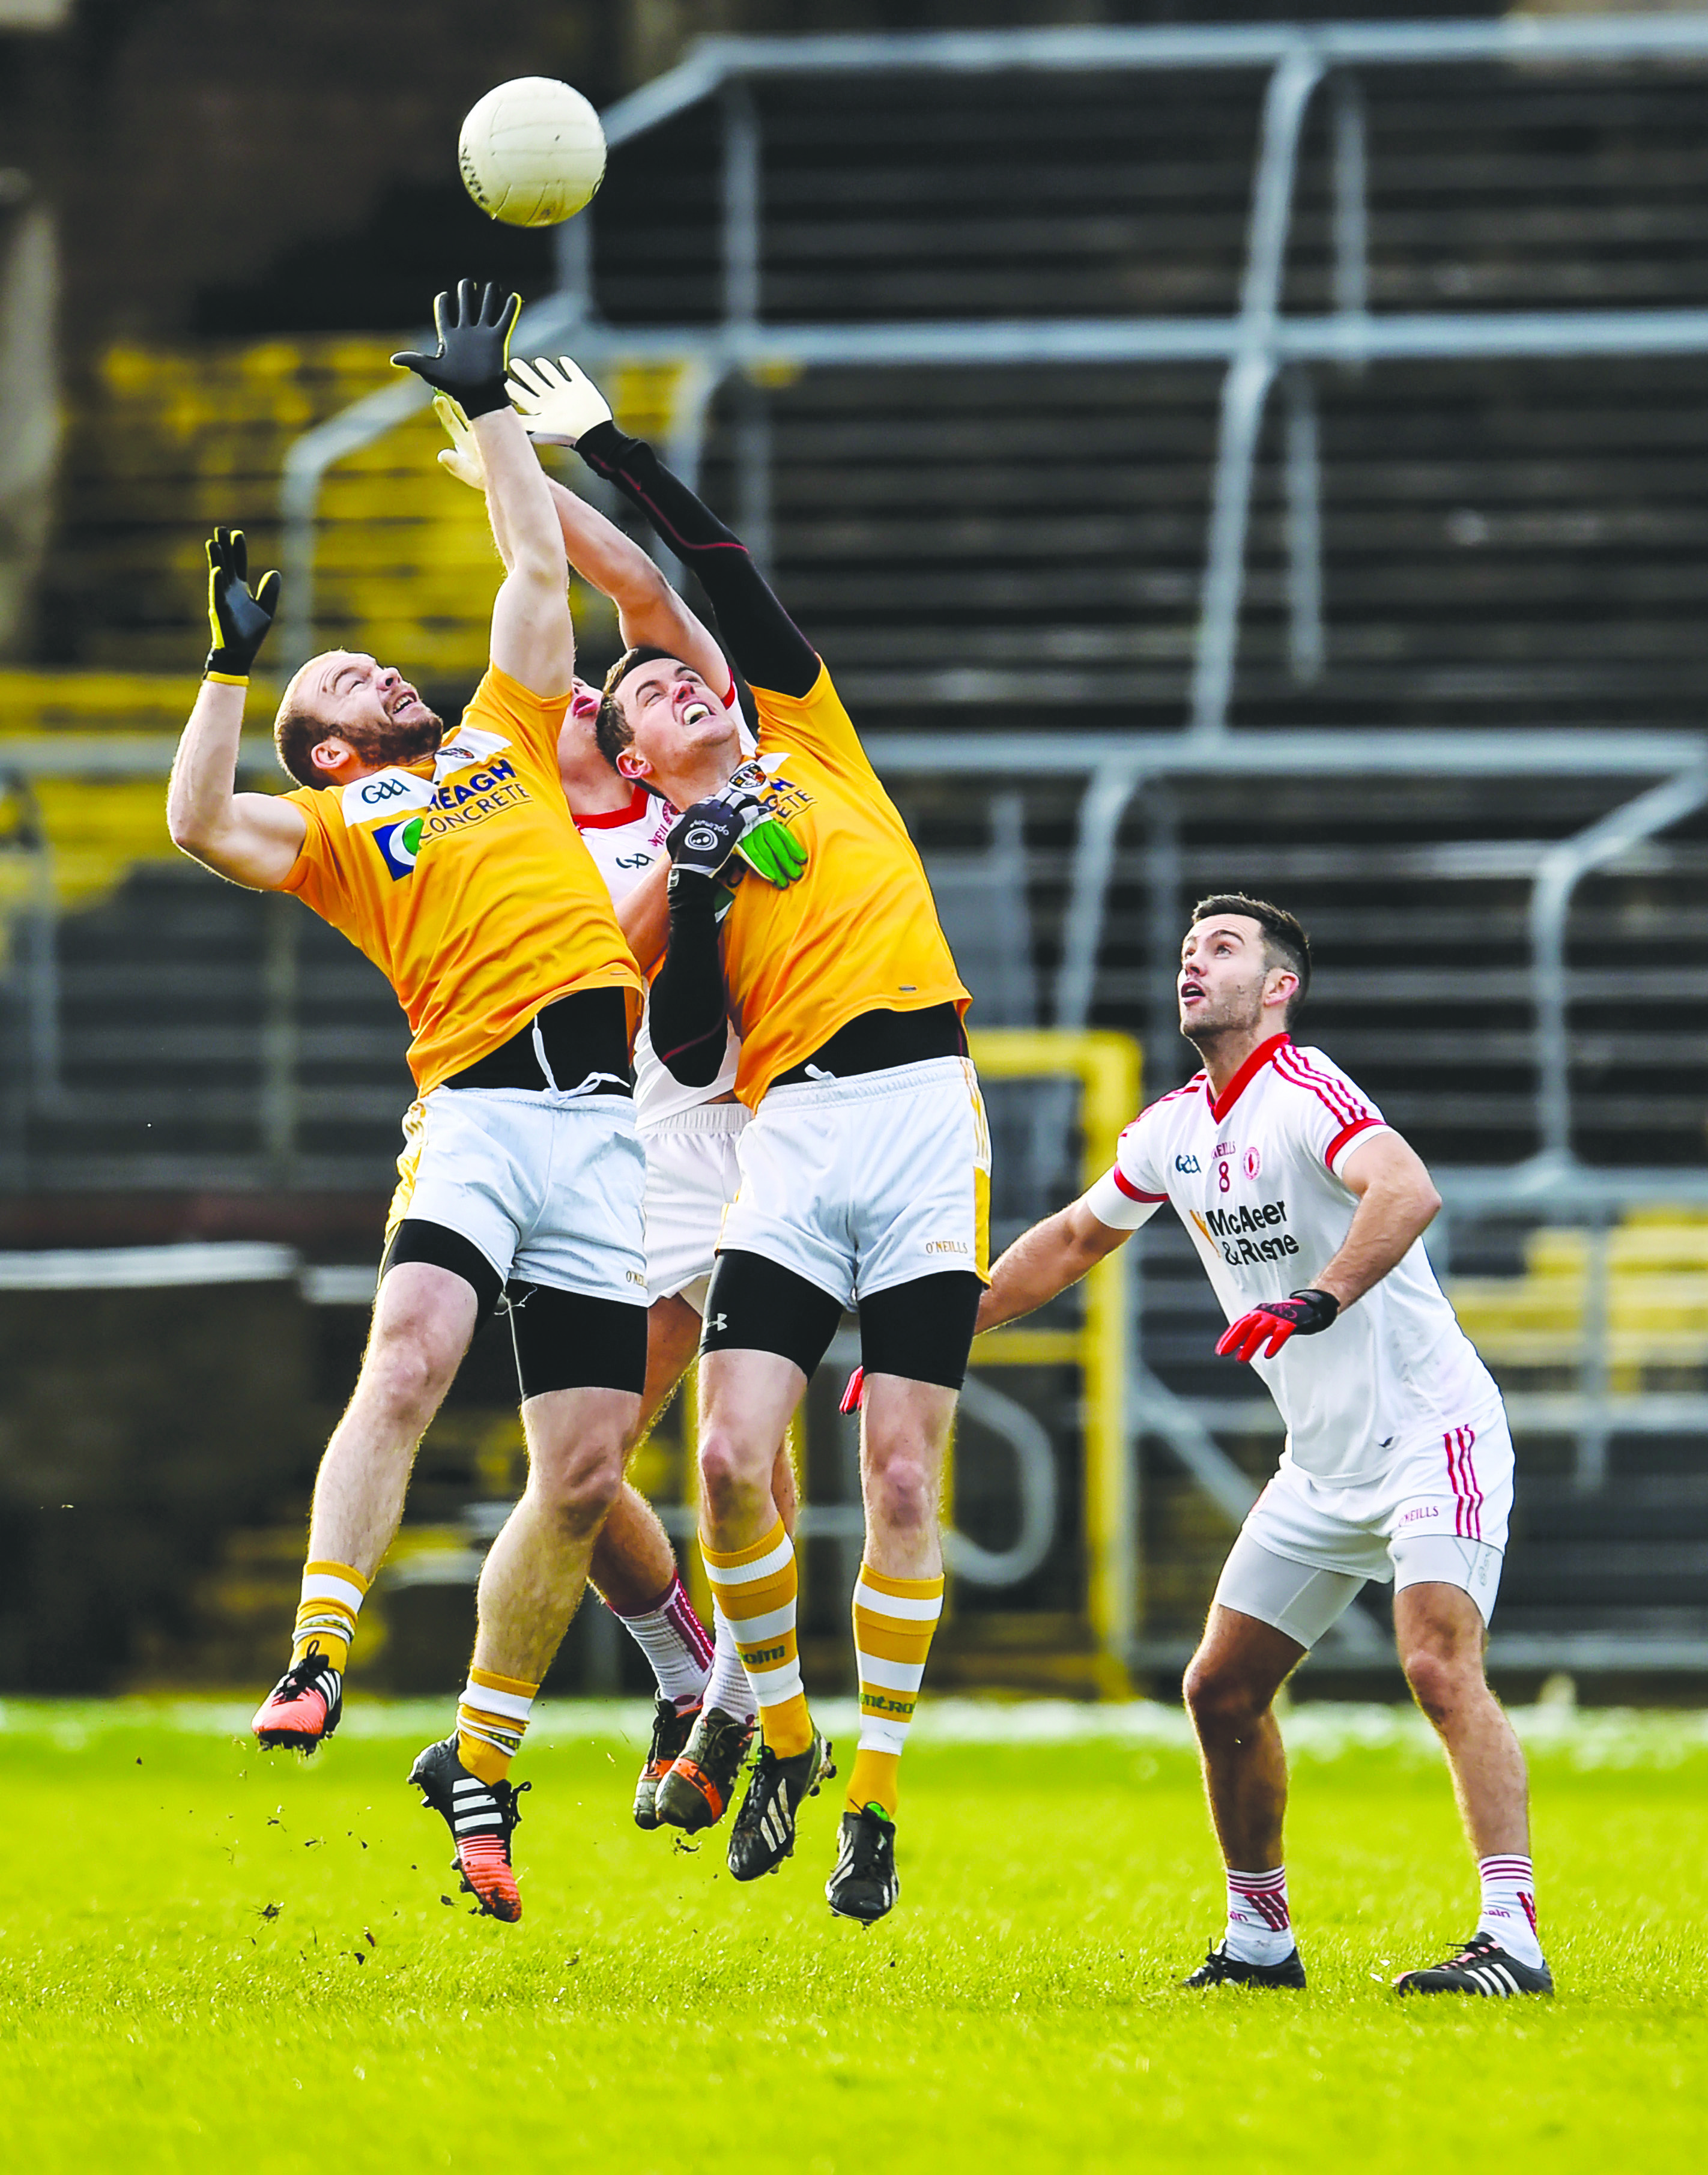 Sean McVeigh says Antrim will need to improve if they are to defeat Wexford on Sunday at Corrigan Park. The Saffrons opened their league campaign with a five-point win over Carlow last Sunday. 